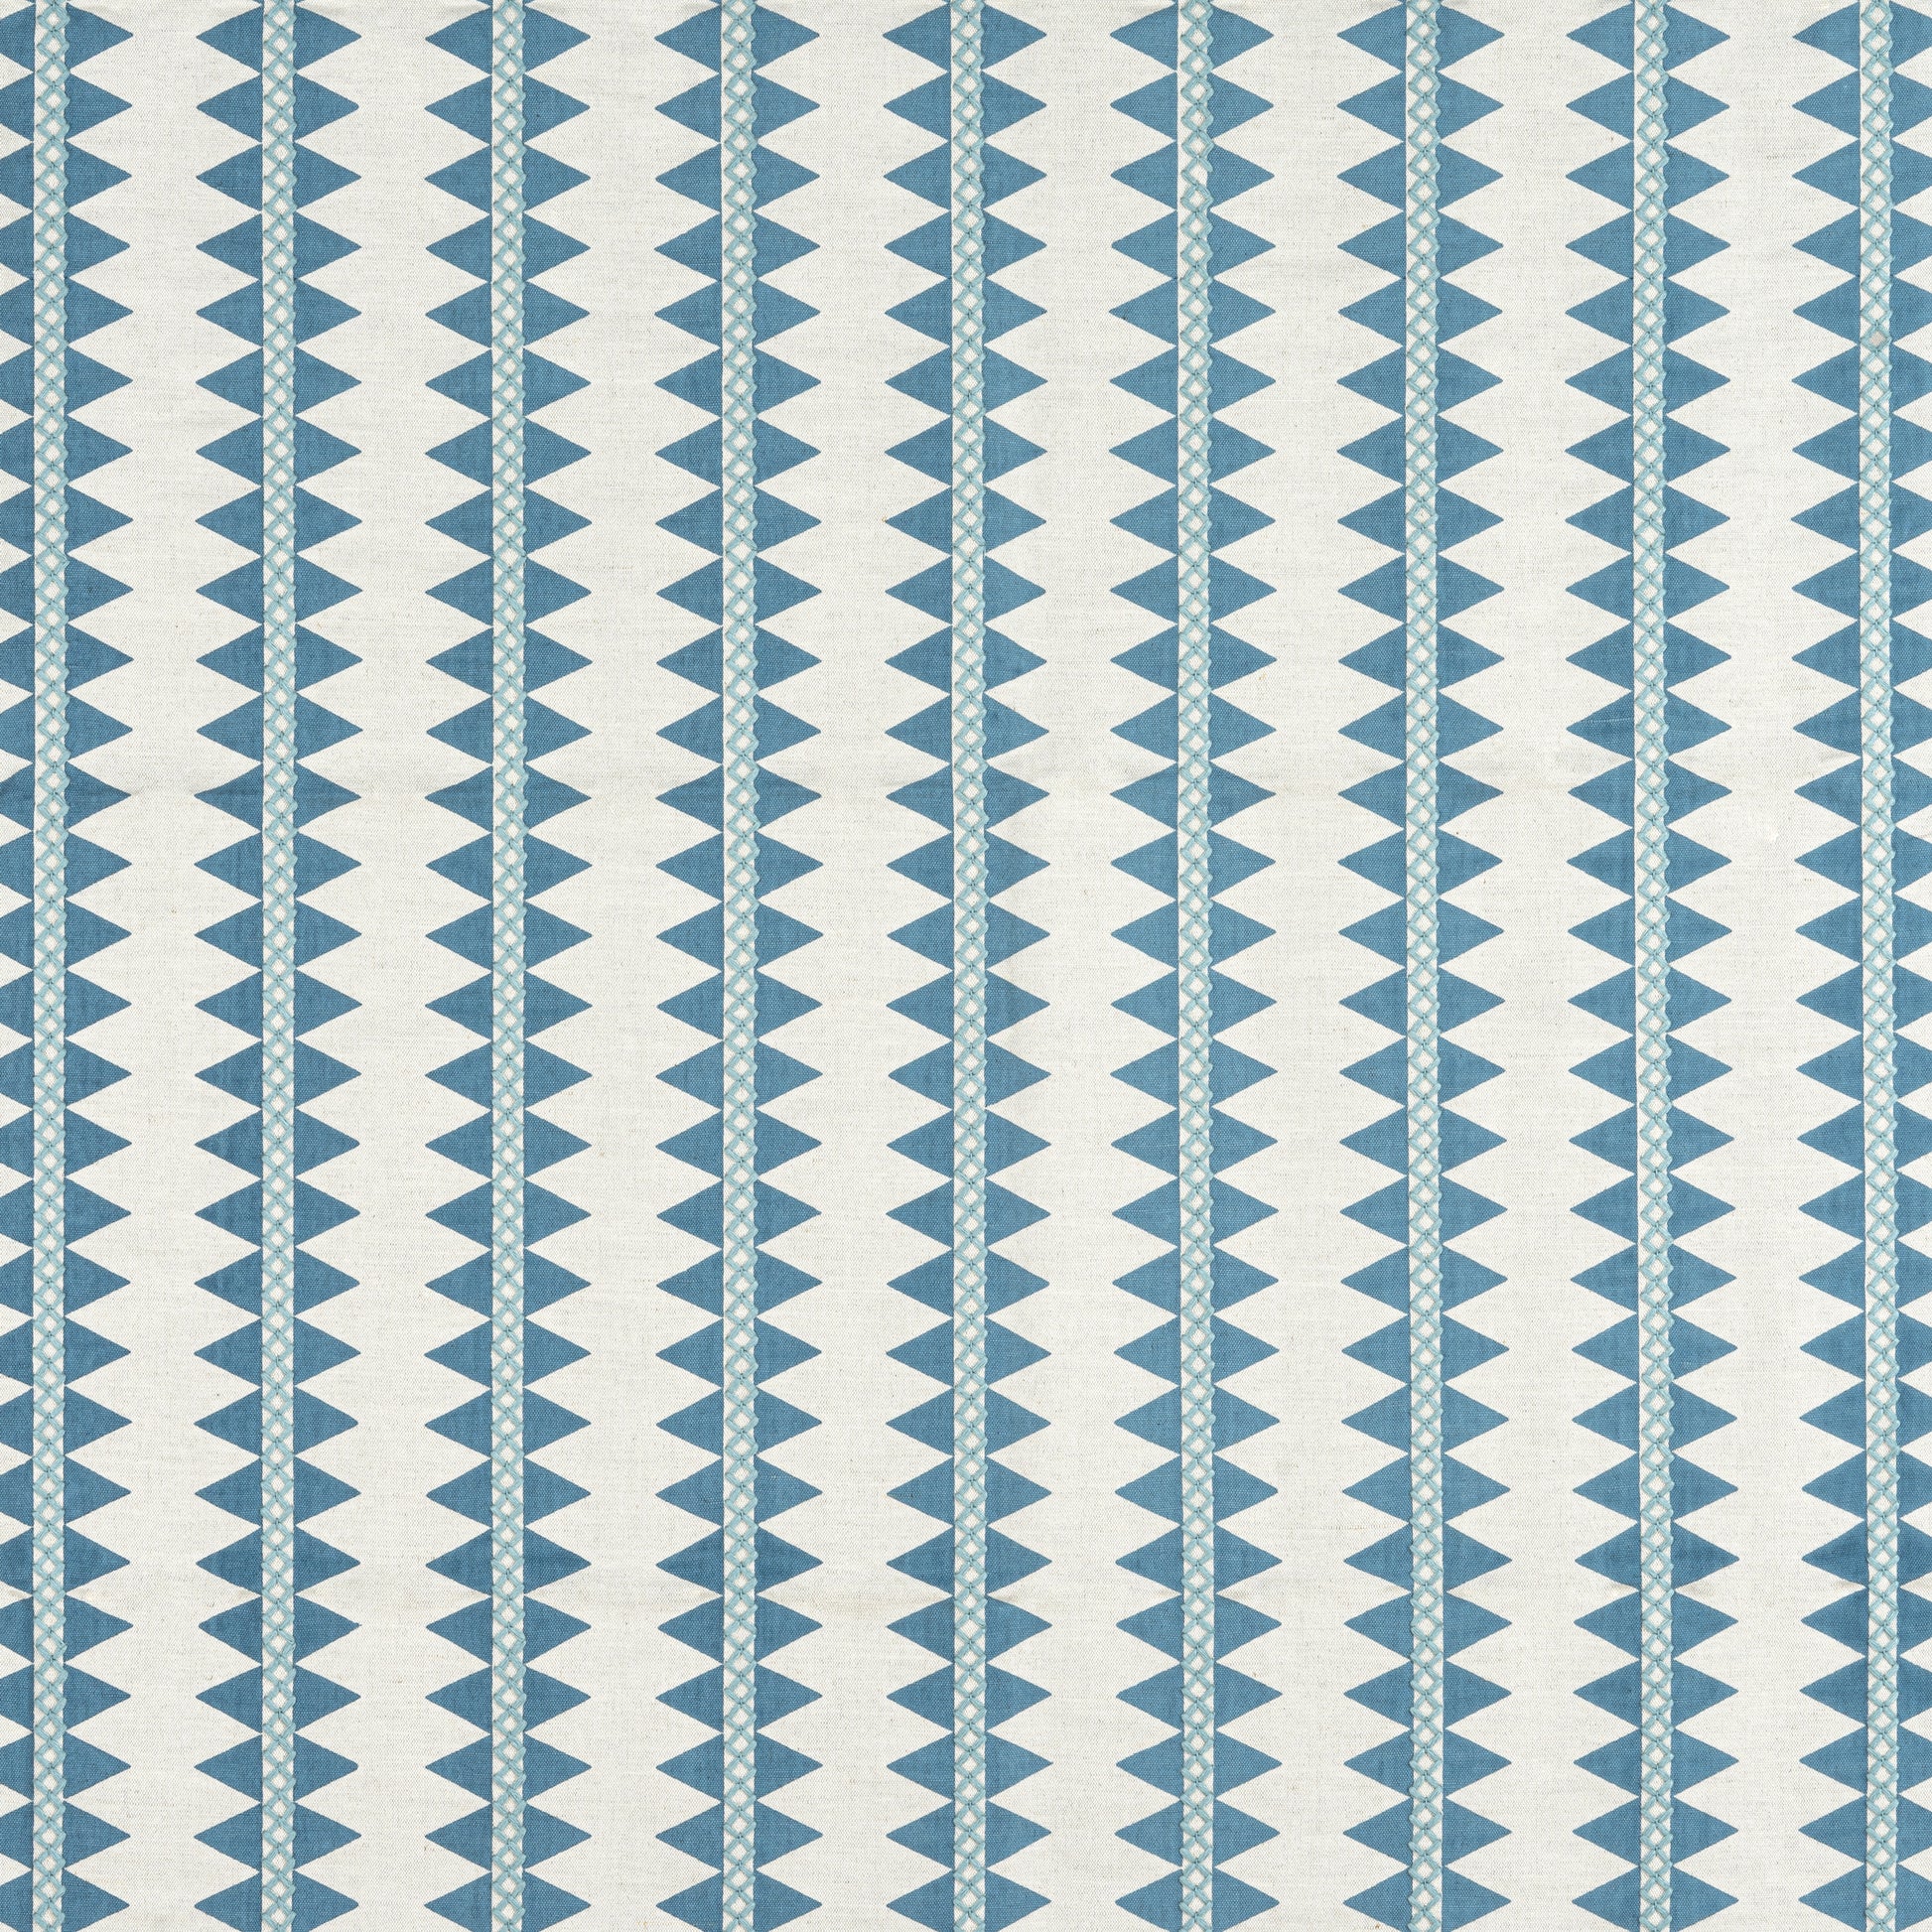 Purchase Thibaut Fabric SKU# W713243 pattern name Reno Stripe Embroidery color Teal